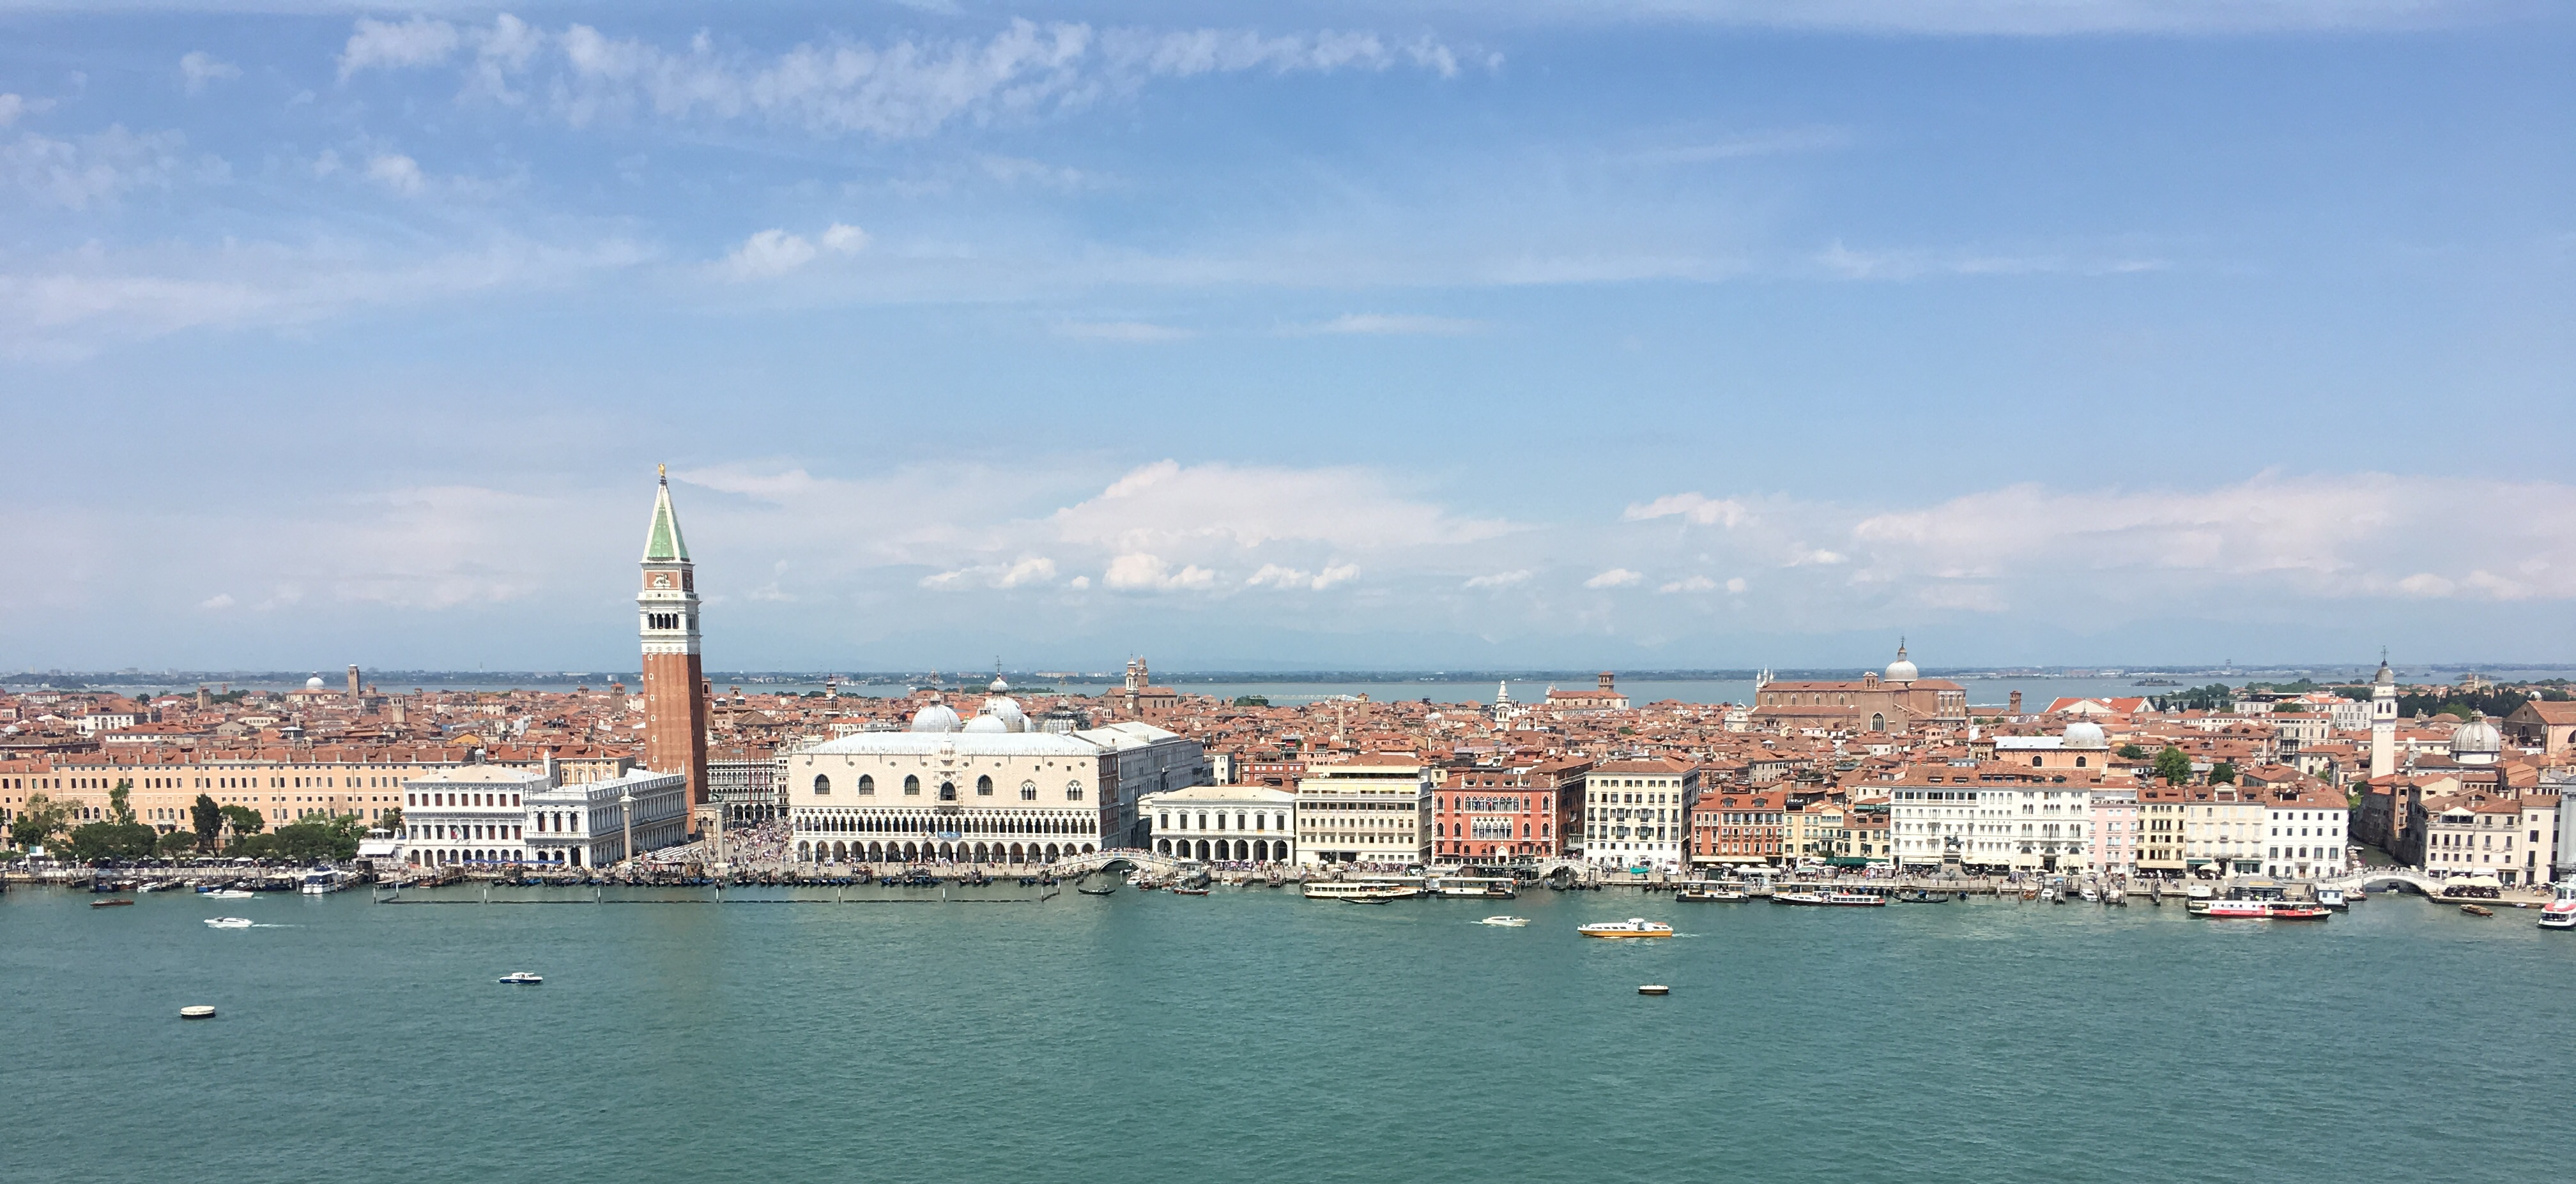 Venice as viewed from the lagoon. The Bell tower of St Mark's with the Doge's Palace to the right.